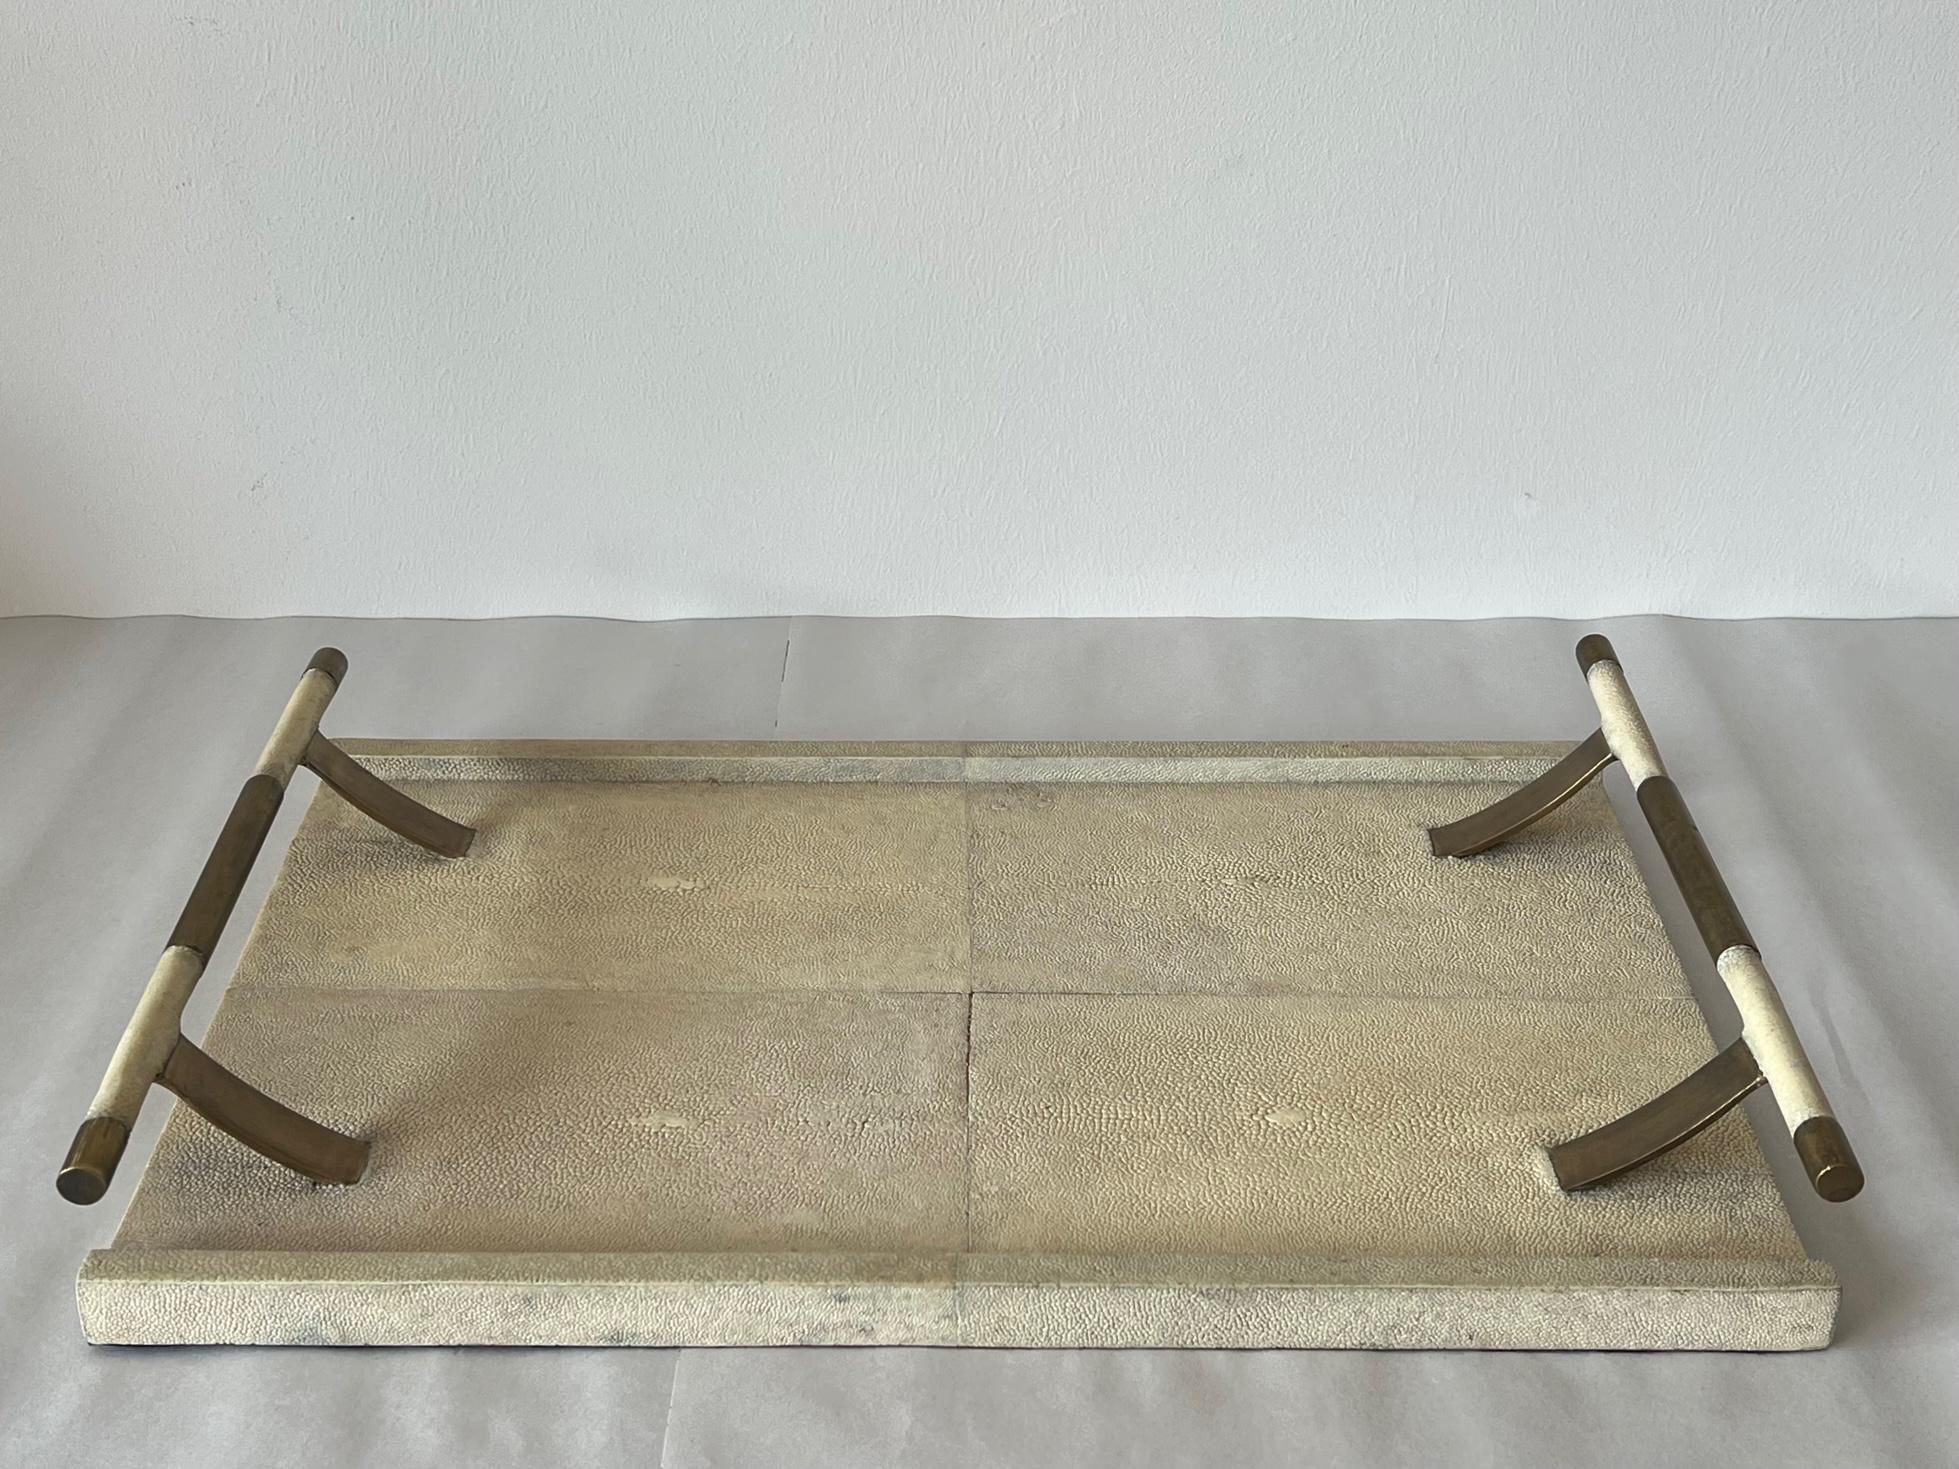 Unusual brass and shagreen serving tray by R & Y Augousti, Paris, manufactured in the Phillipines, ca' 1980s. Art Deco style, very well made.